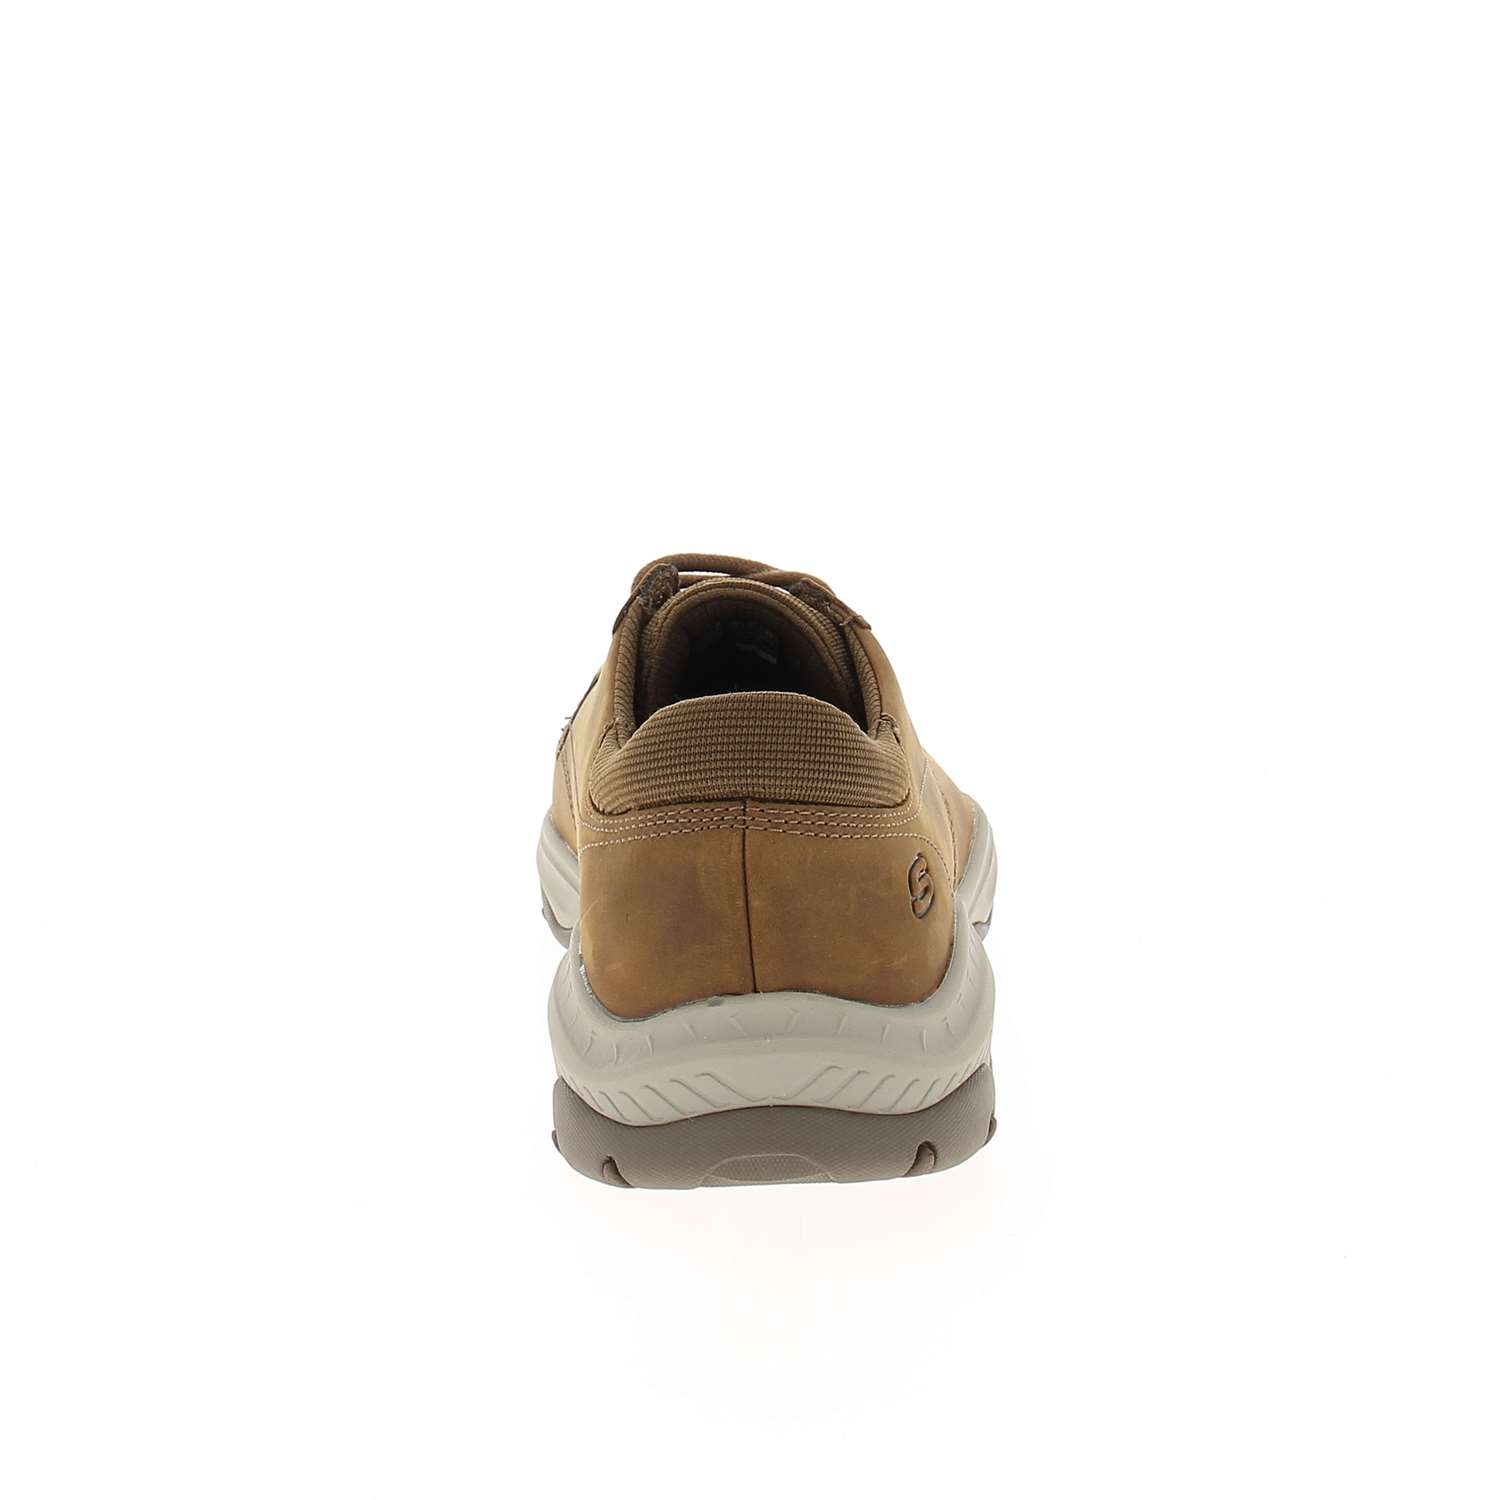 04 - CRASTER RELAXED FIT - SKECHERS - Chaussures à lacets - Nubuck